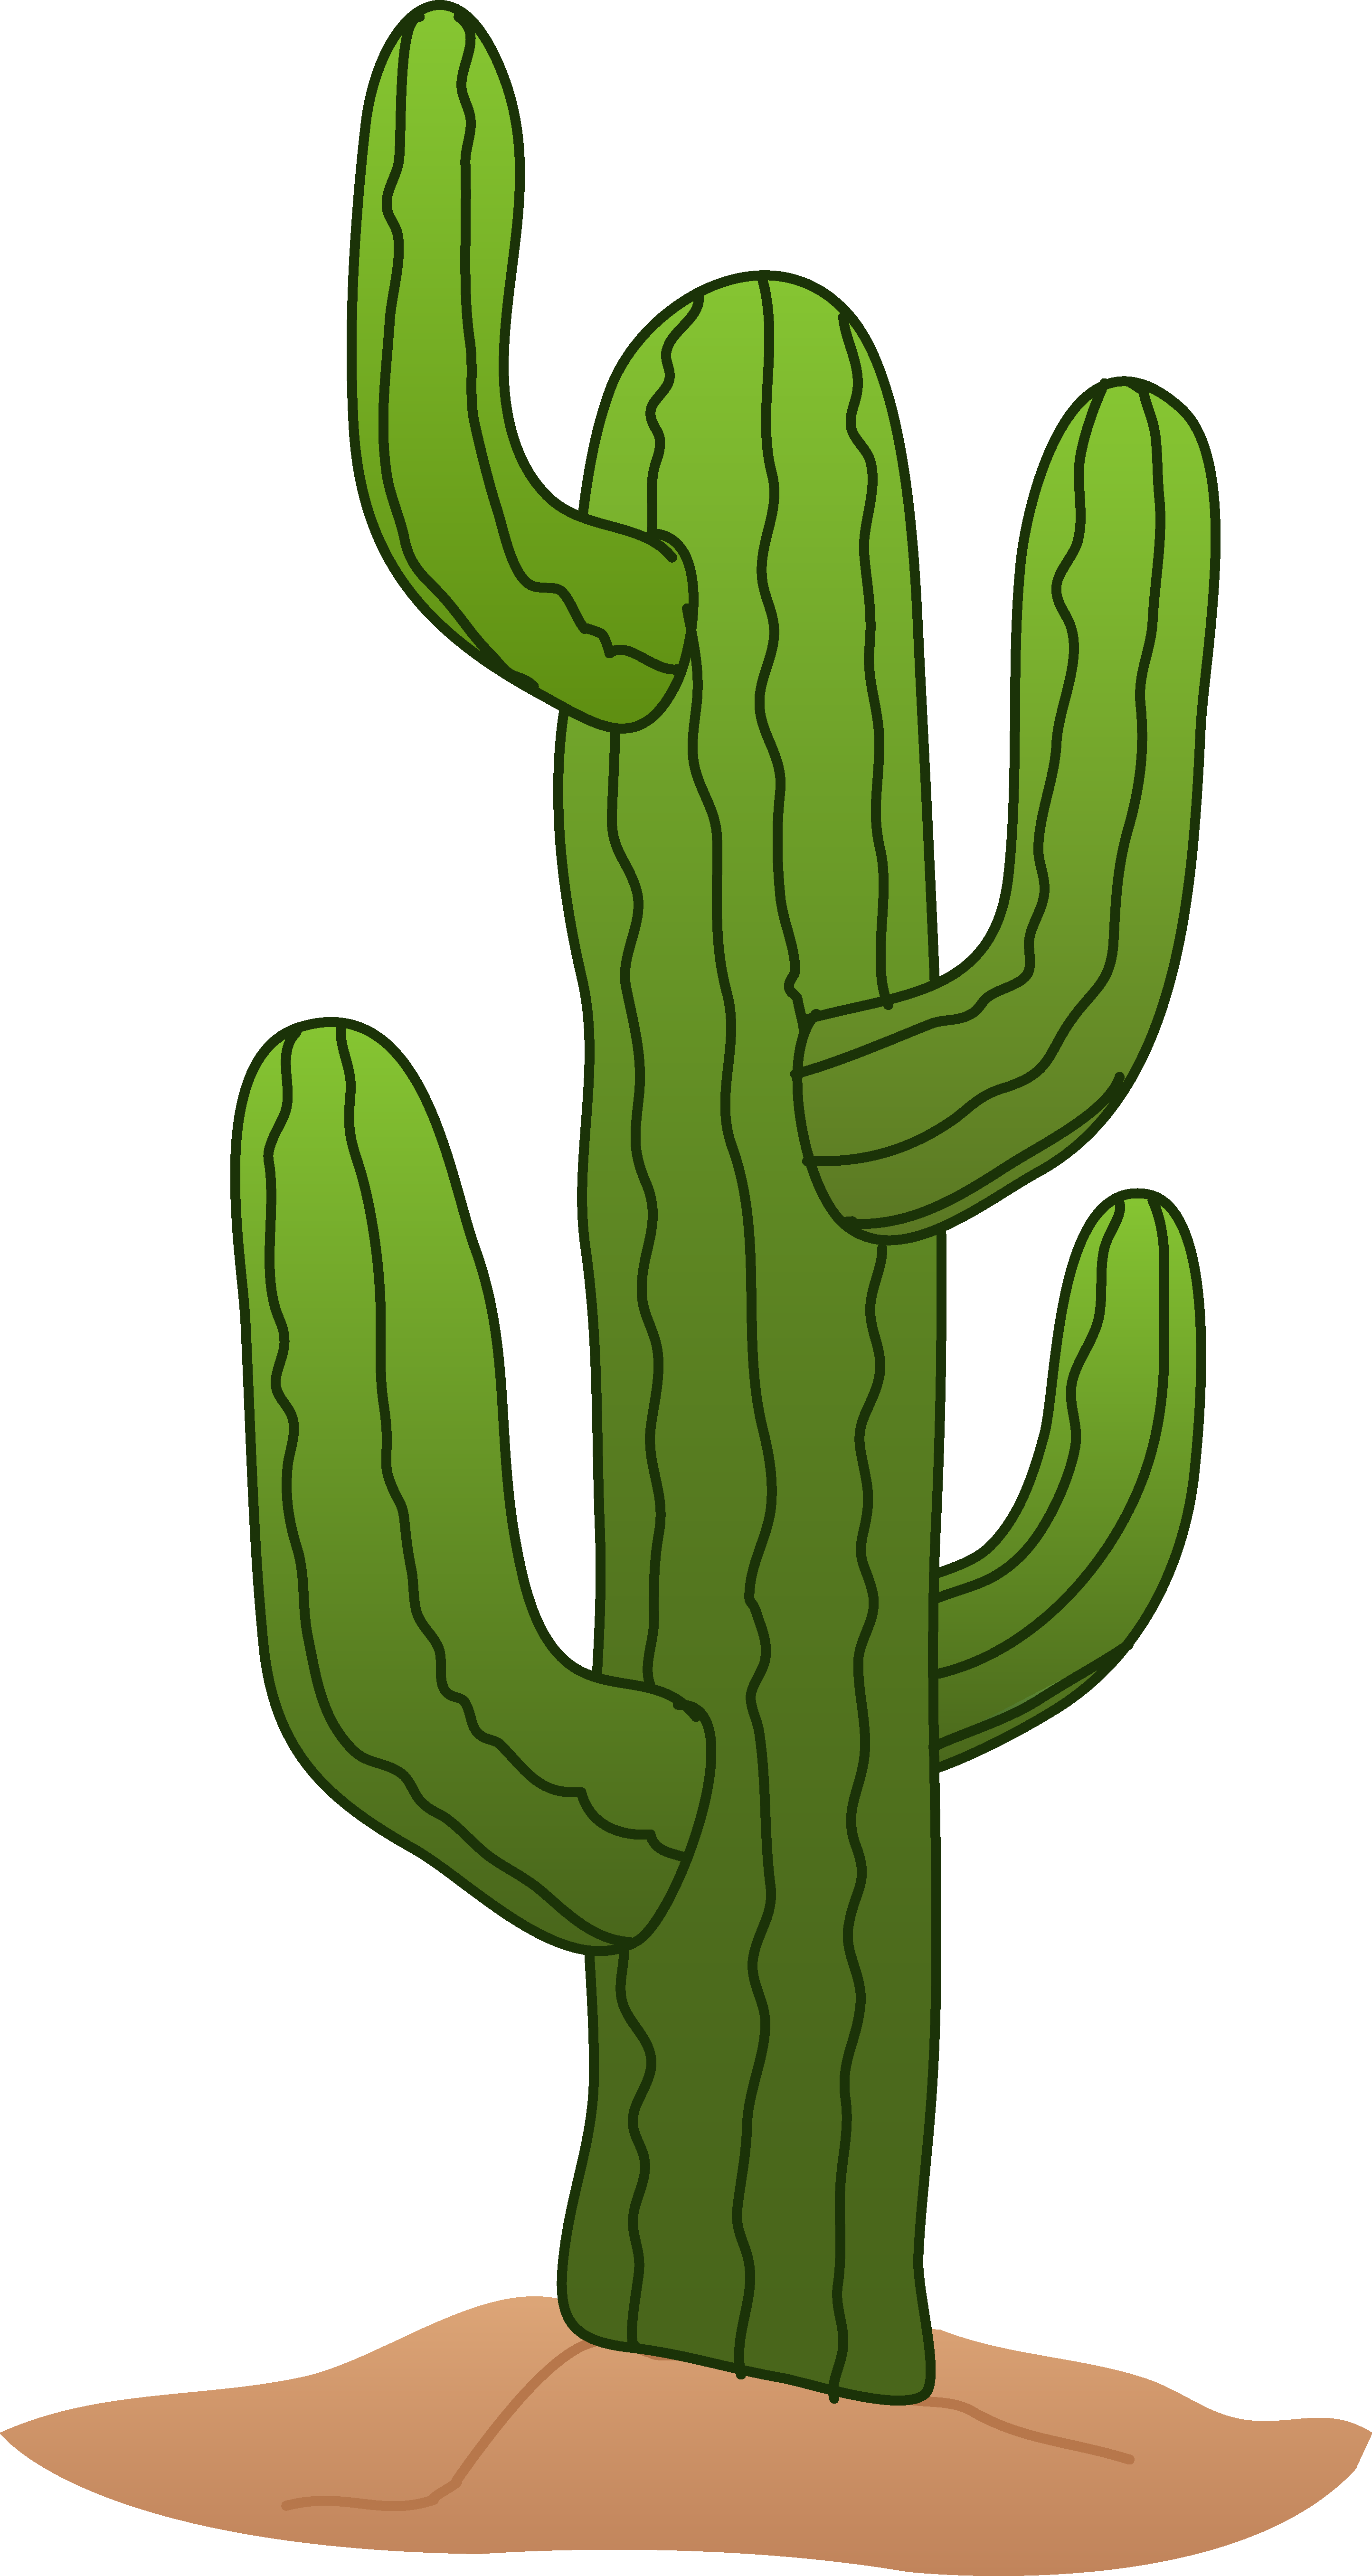 cactus-images-free-cliparts-co